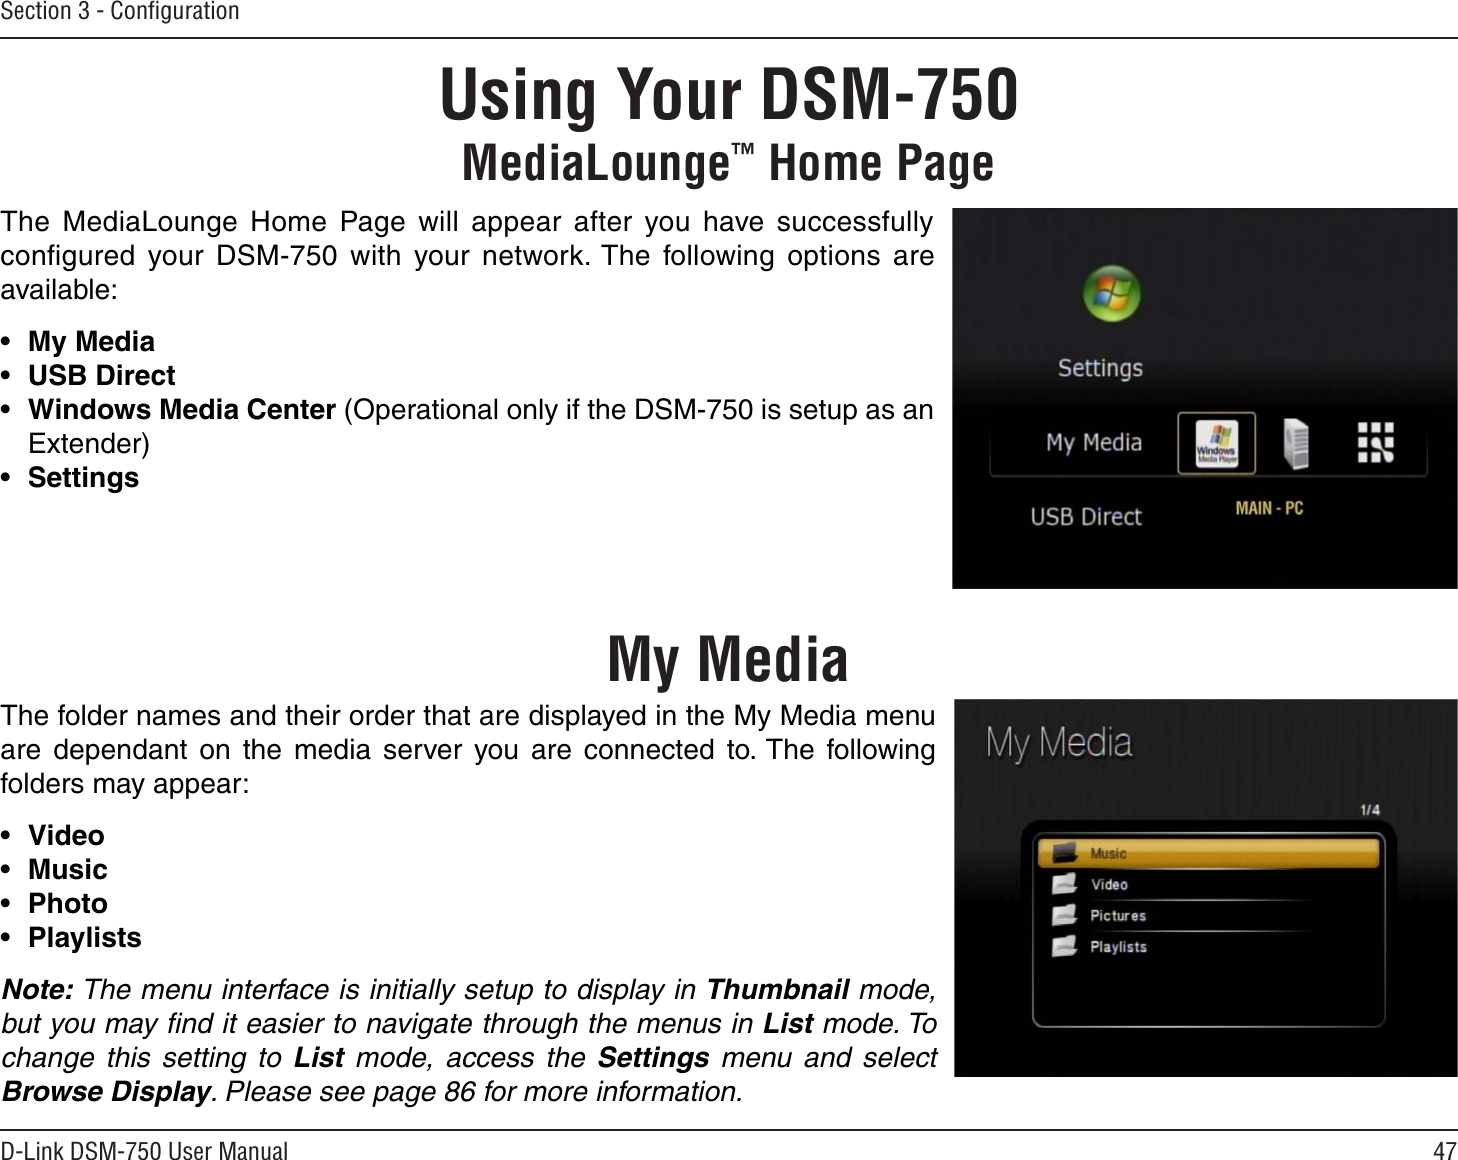 47D-Link DSM-750 User ManualSection 3 - ConﬁgurationUsing Your DSM-750MediaLounge™ Home PageThe MediaLounge Home Page will appear after you have successfully conﬁgured your DSM-750 with your network. The following options are available:•My Media•USB Direct•Windows Media Center (Operational only if the DSM-750 is setup as an Extender)•SettingsThe folder names and their order that are displayed in the My Media menu are dependant on the media server you are connected to. The following folders may appear:•Video•Music•Photo•PlaylistsNote: The menu interface is initially setup to display in Thumbnail mode, but you may ﬁnd it easier to navigate through the menus in List mode. To change this setting to List  mode, access the Settings  menu and selectBrowse Display. Please see page 86 for more information.My Media